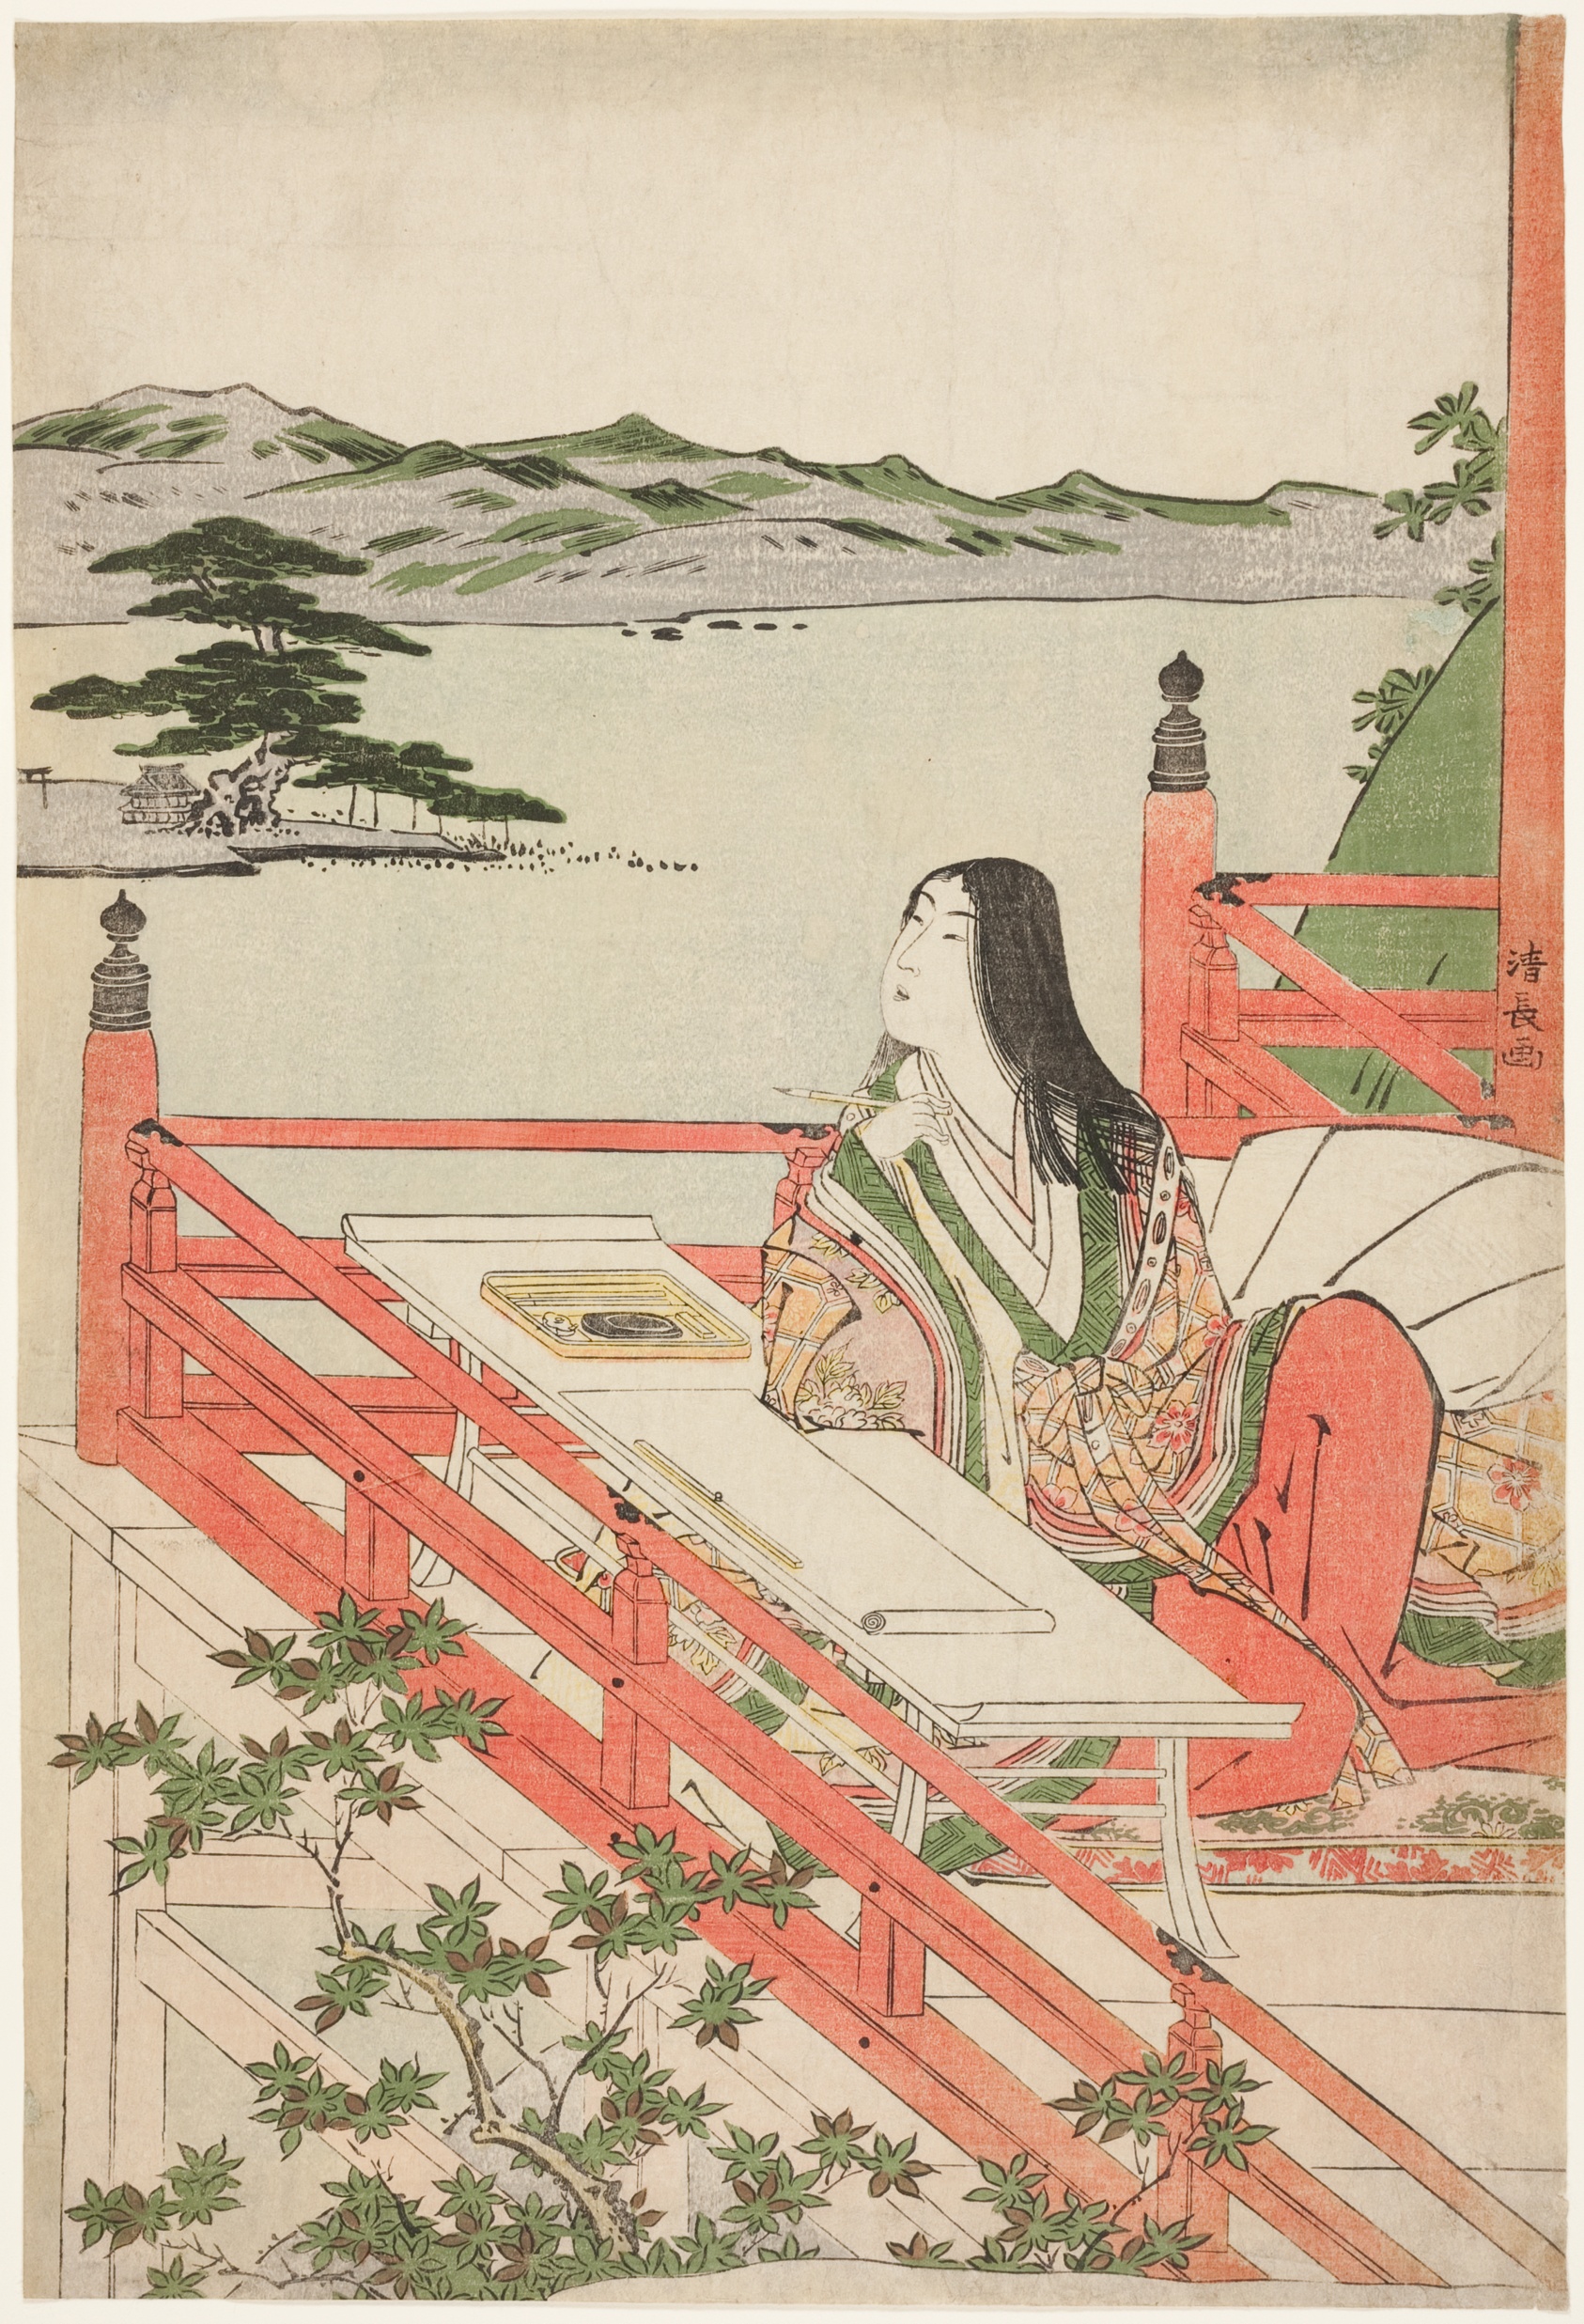 A color woodcut depicting the author Murasaki Shikibu, seated at a writing desk on the engawa (veranda) of Ishiyamadera Temple on Lake Biwa. She is holding a brush and gazing at the moon, which is faintly visible in the sky above.